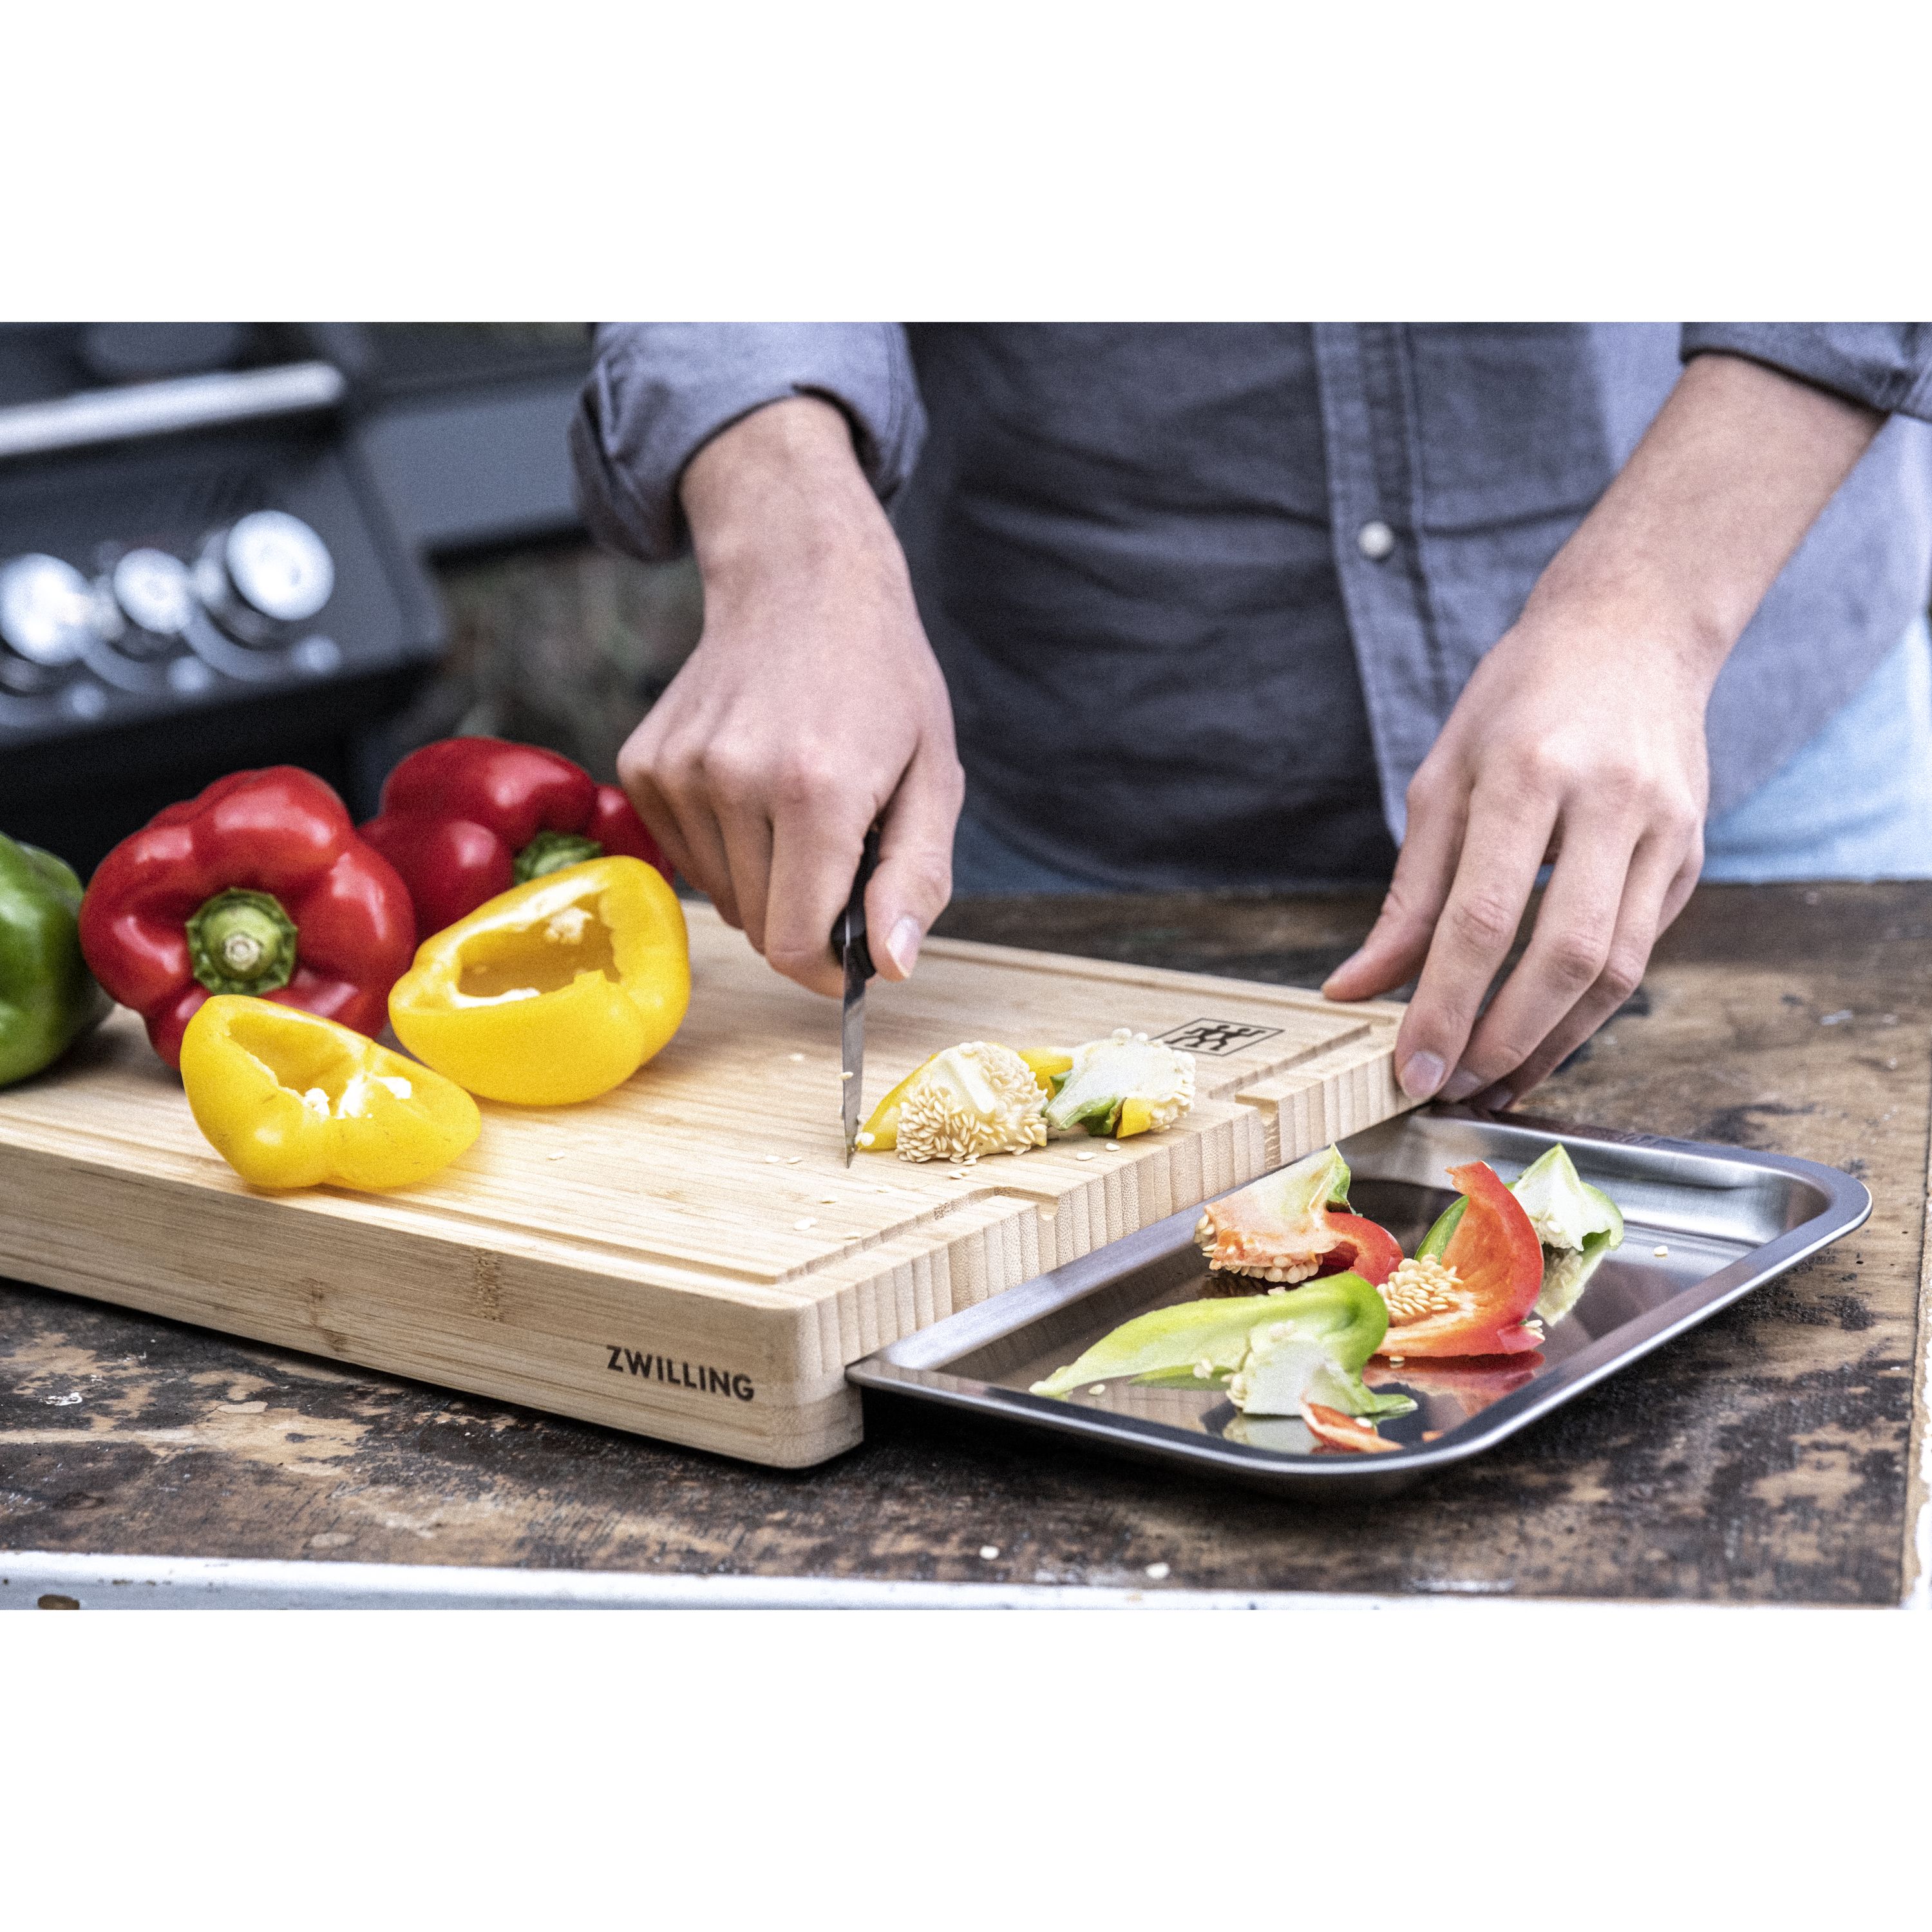 ZWILLING BBQ+ Bamboo Cutting Board with Tray, 1 unit - Kroger